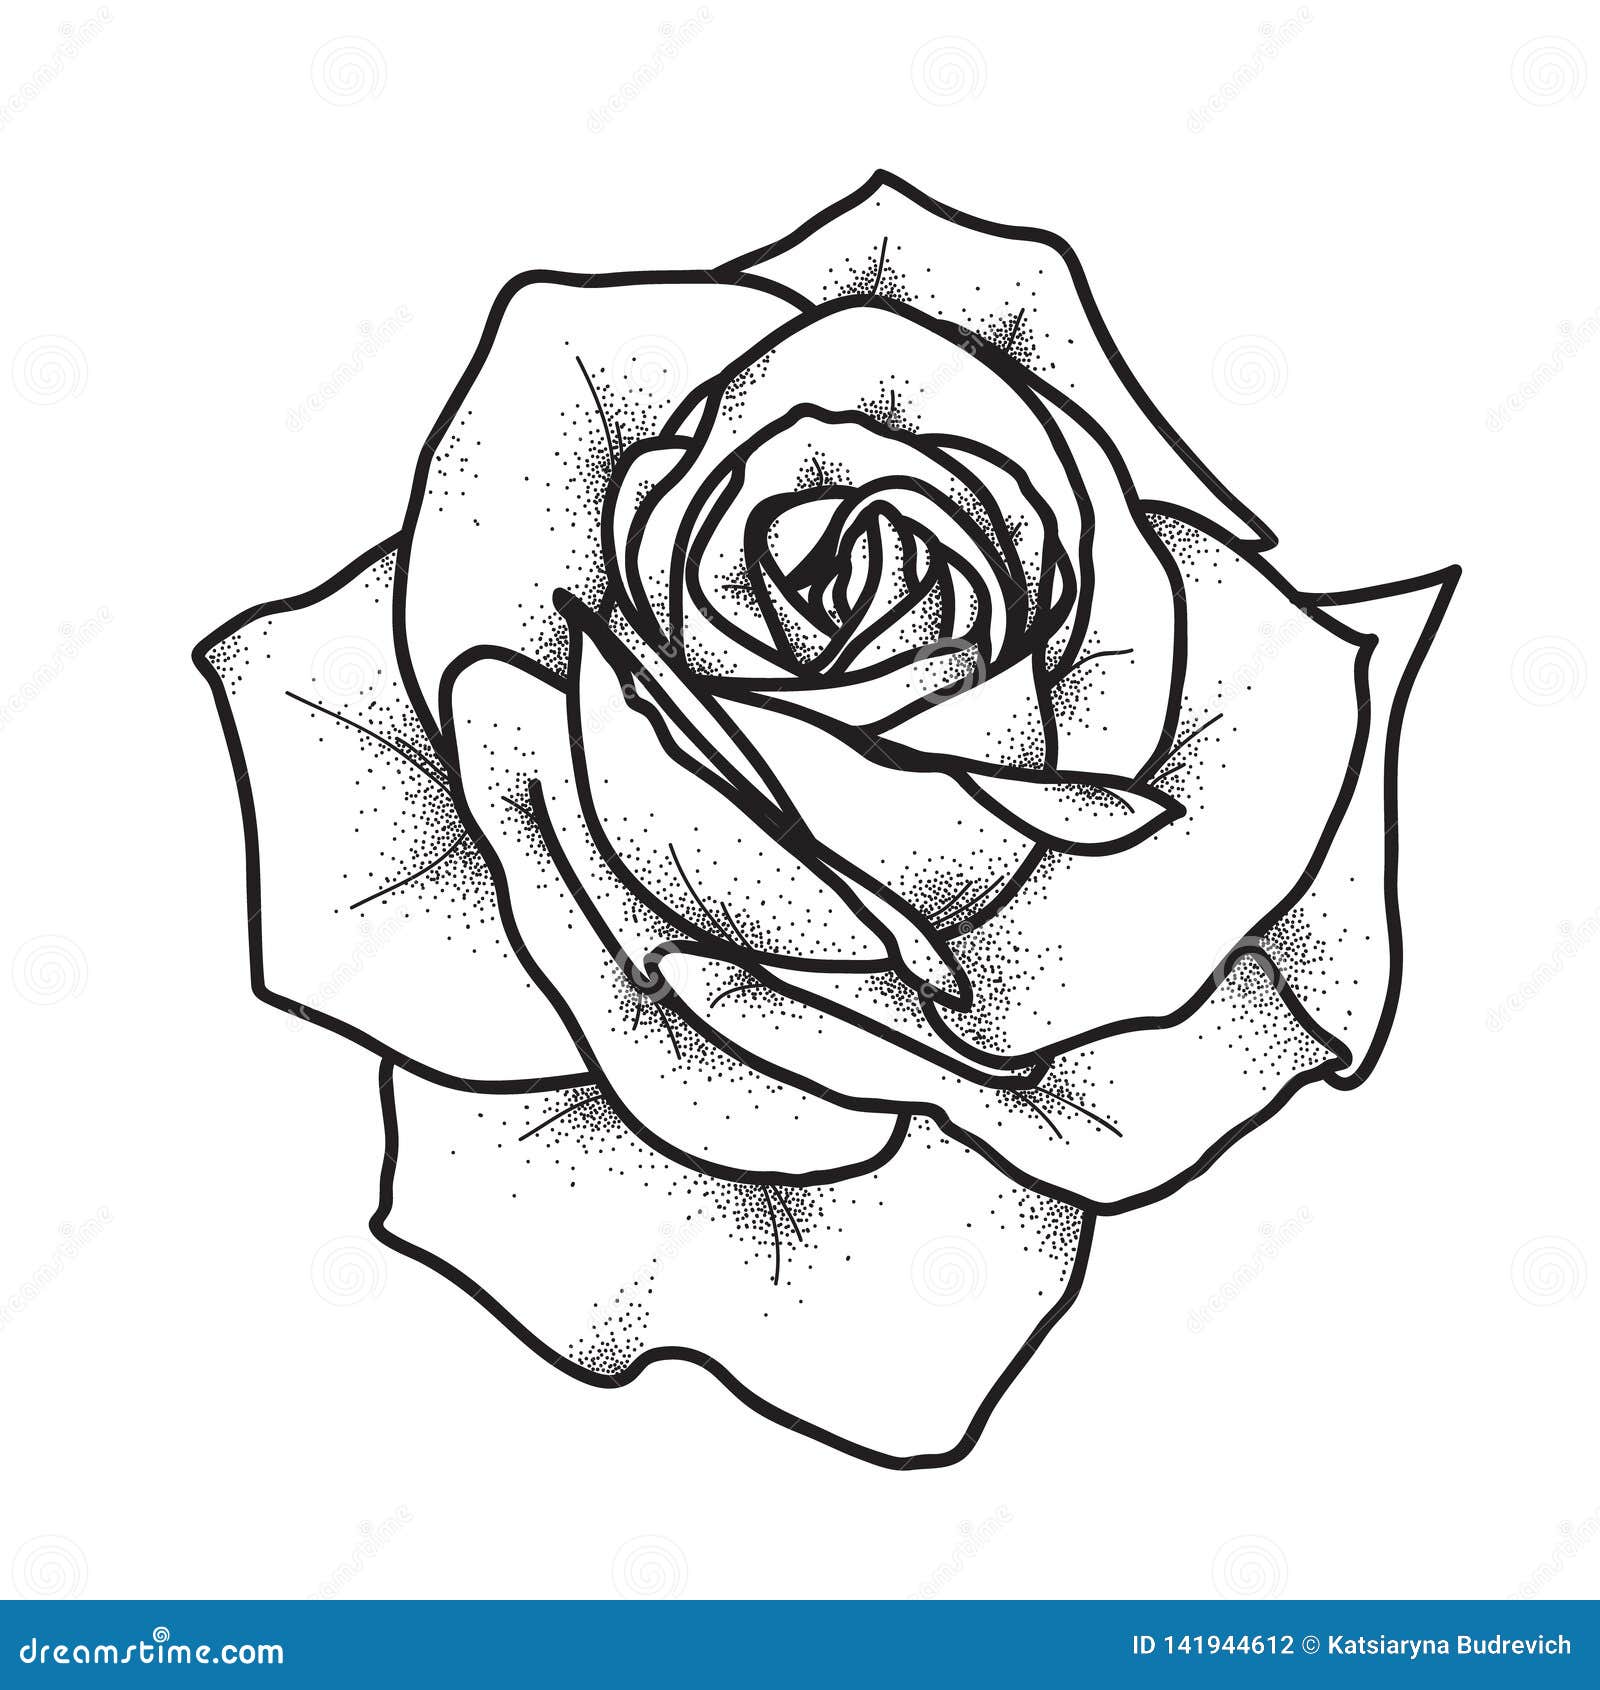 Top 51 Best Simple Rose Tattoo Ideas  2021 Inspiration Guide